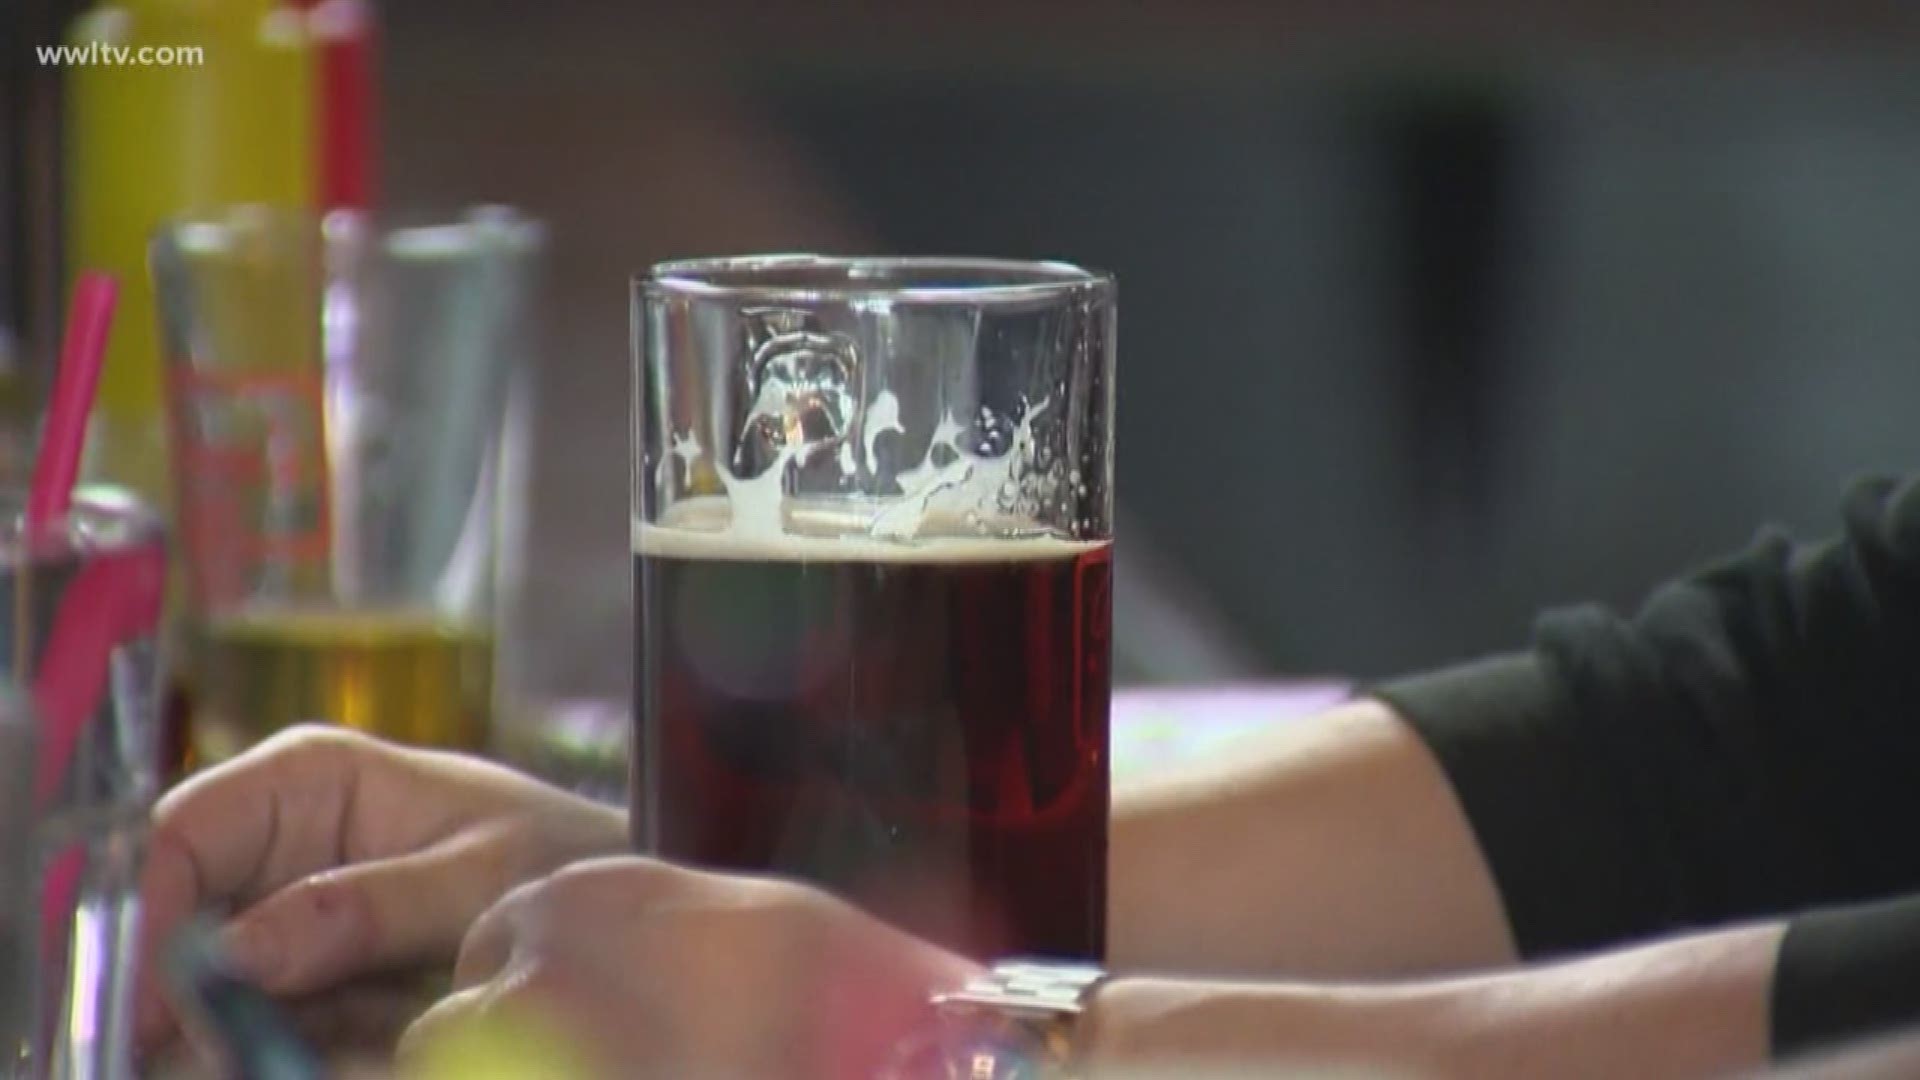 Louisiana State Senator Eric LaFleur says his proposal is an extension of current law, aimed at reducing binge drinking among young people. 